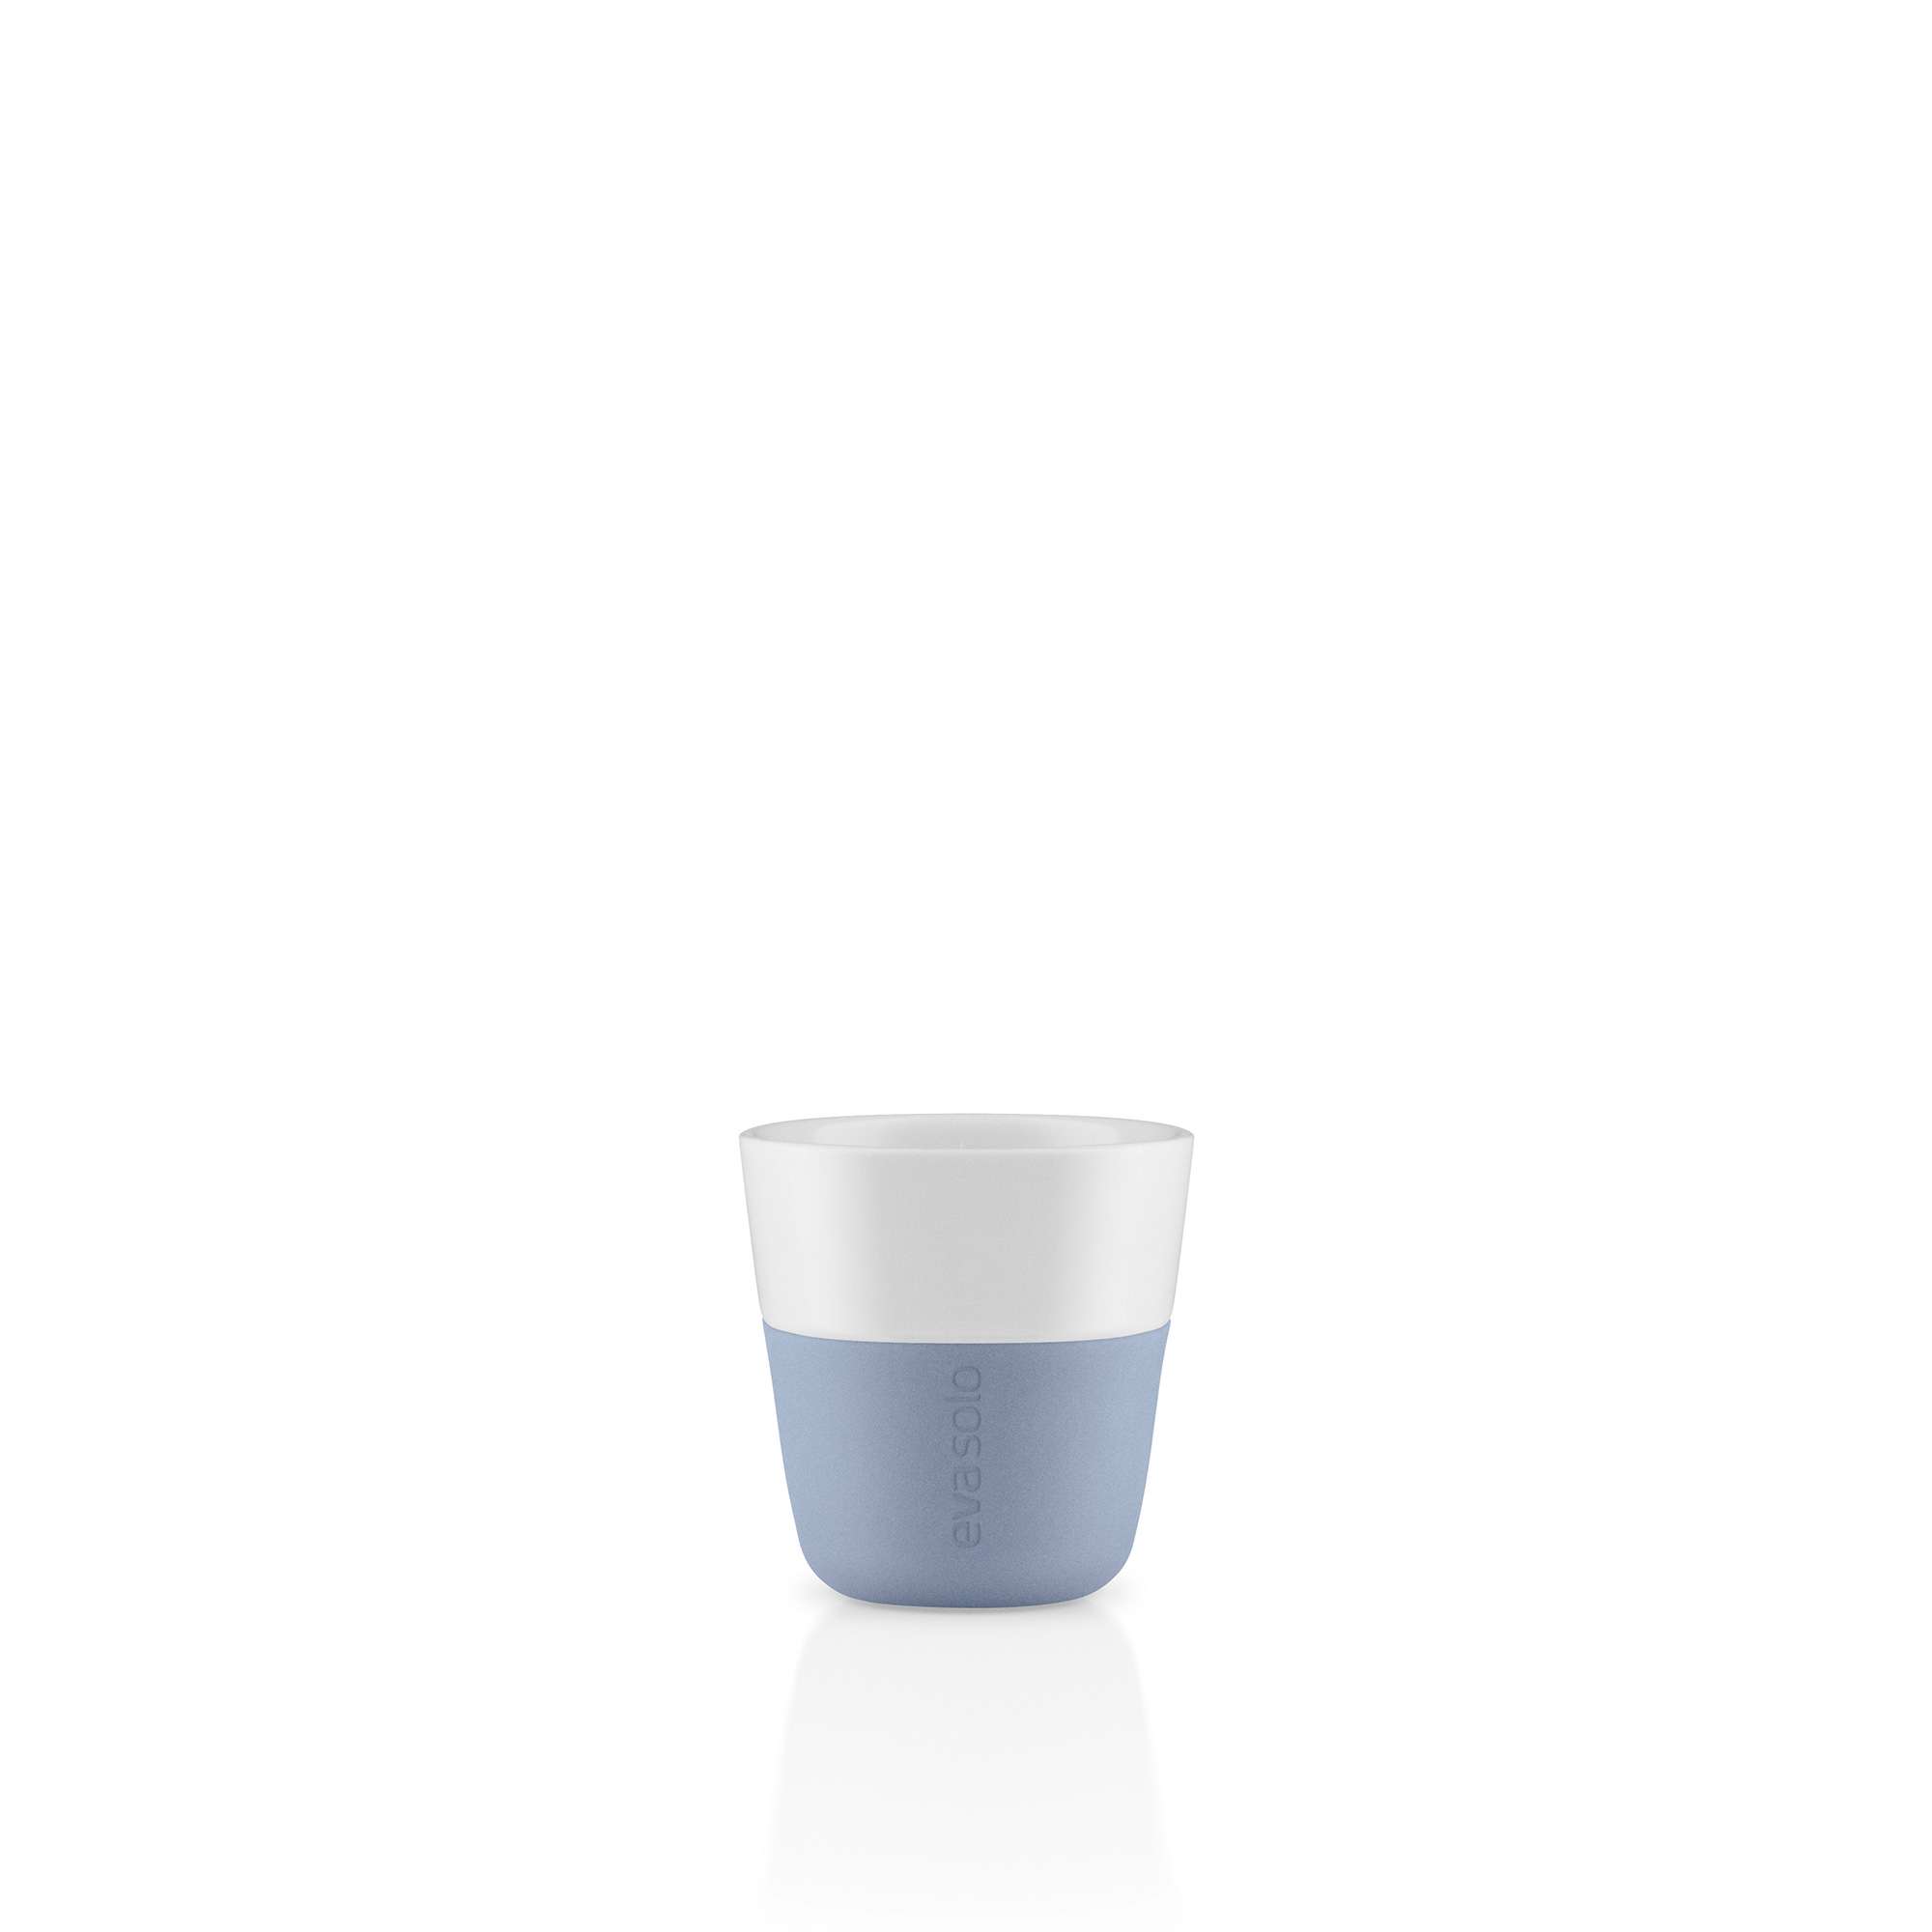 Eva Solo | 2 Espresso Tumbler Mugs | 3 oz Porcelain Coffee Cup Tumblers  with Silicone-coated Grip | …See more Eva Solo | 2 Espresso Tumbler Mugs |  3